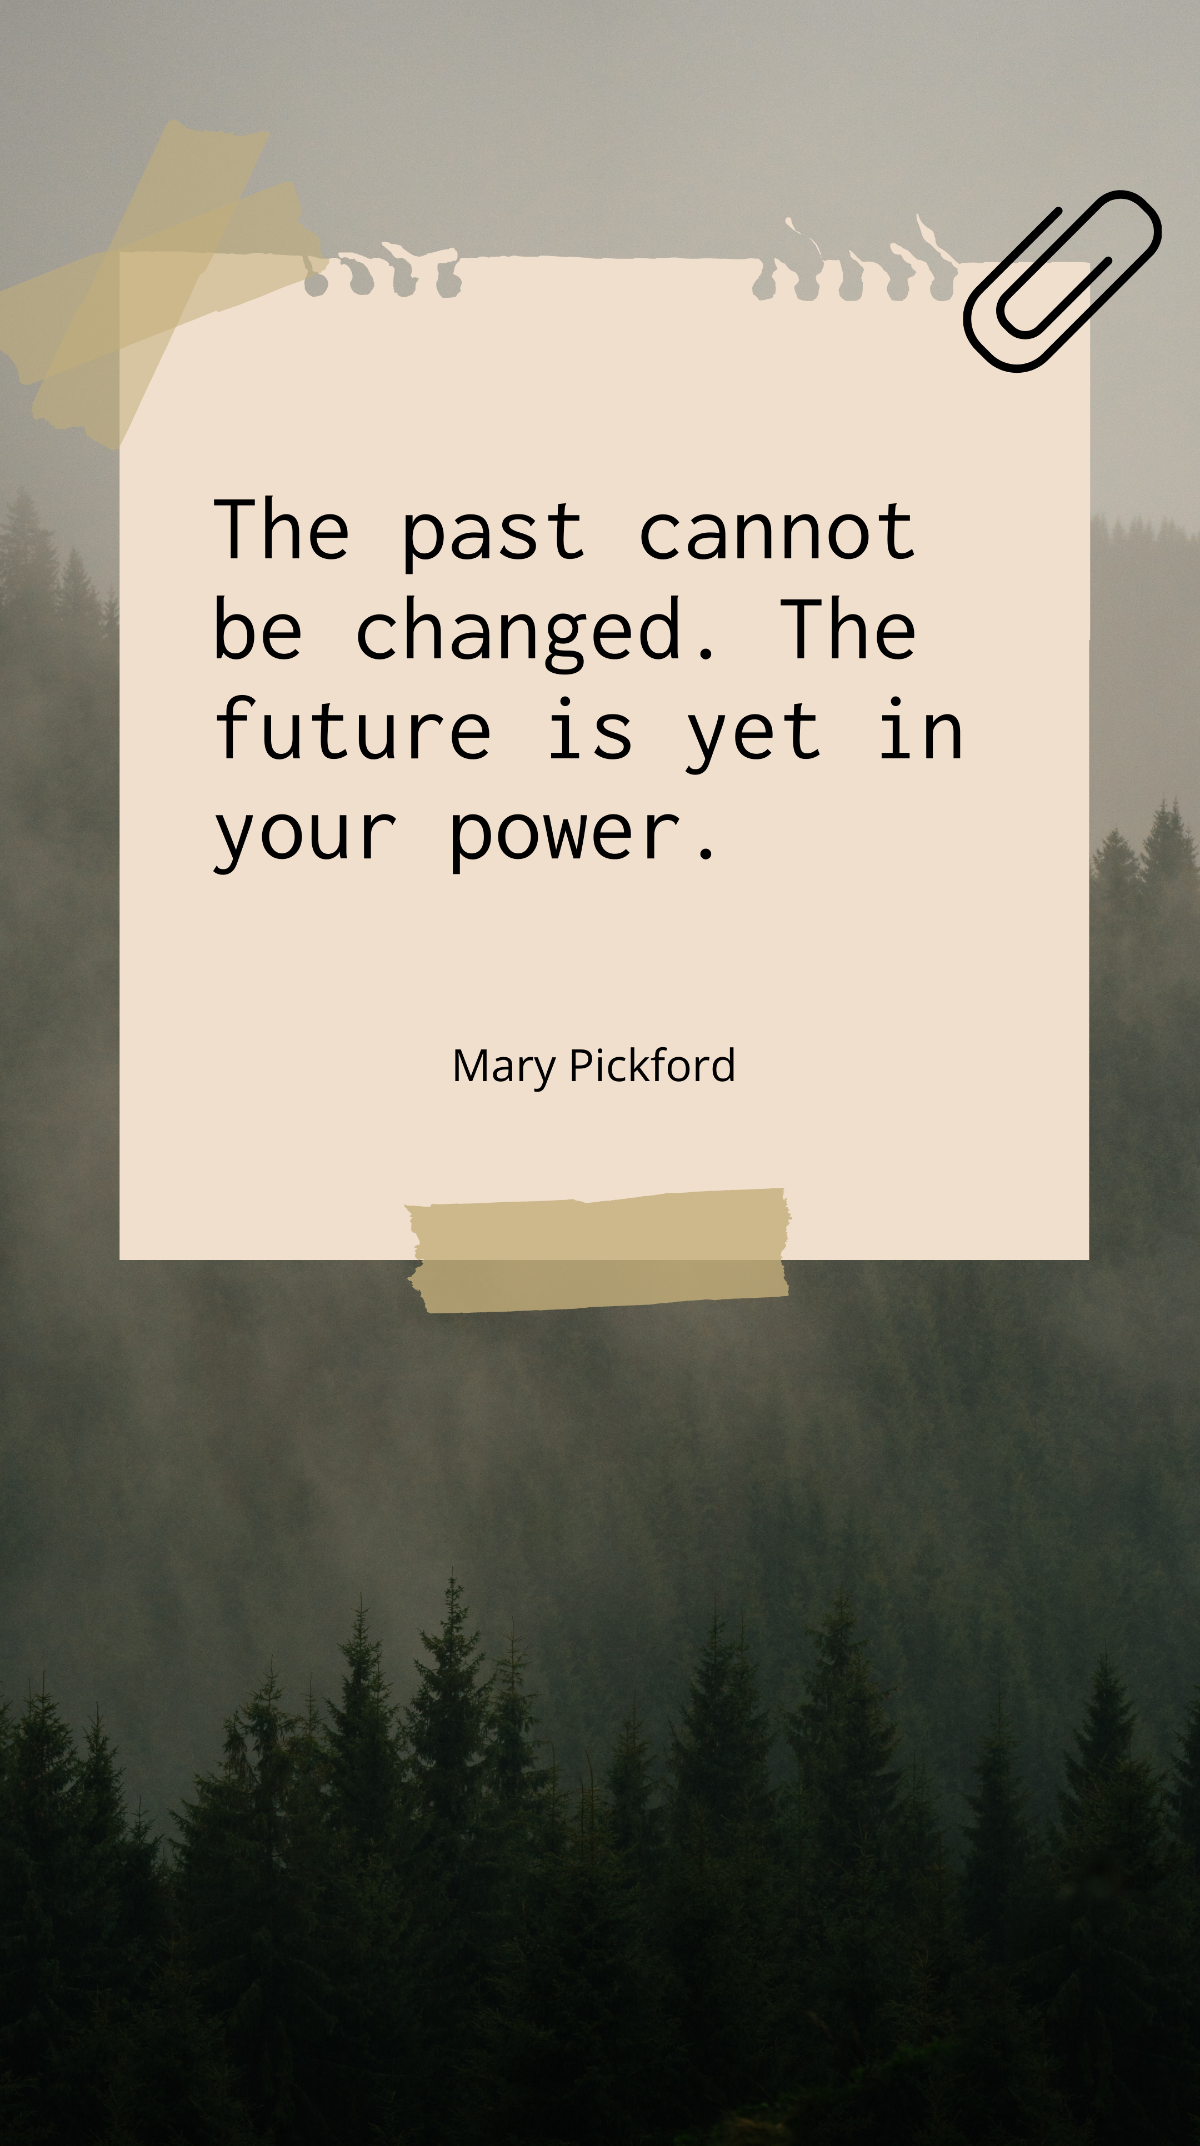 Mary Pickford - The past cannot be changed. The future is yet in your power. Template